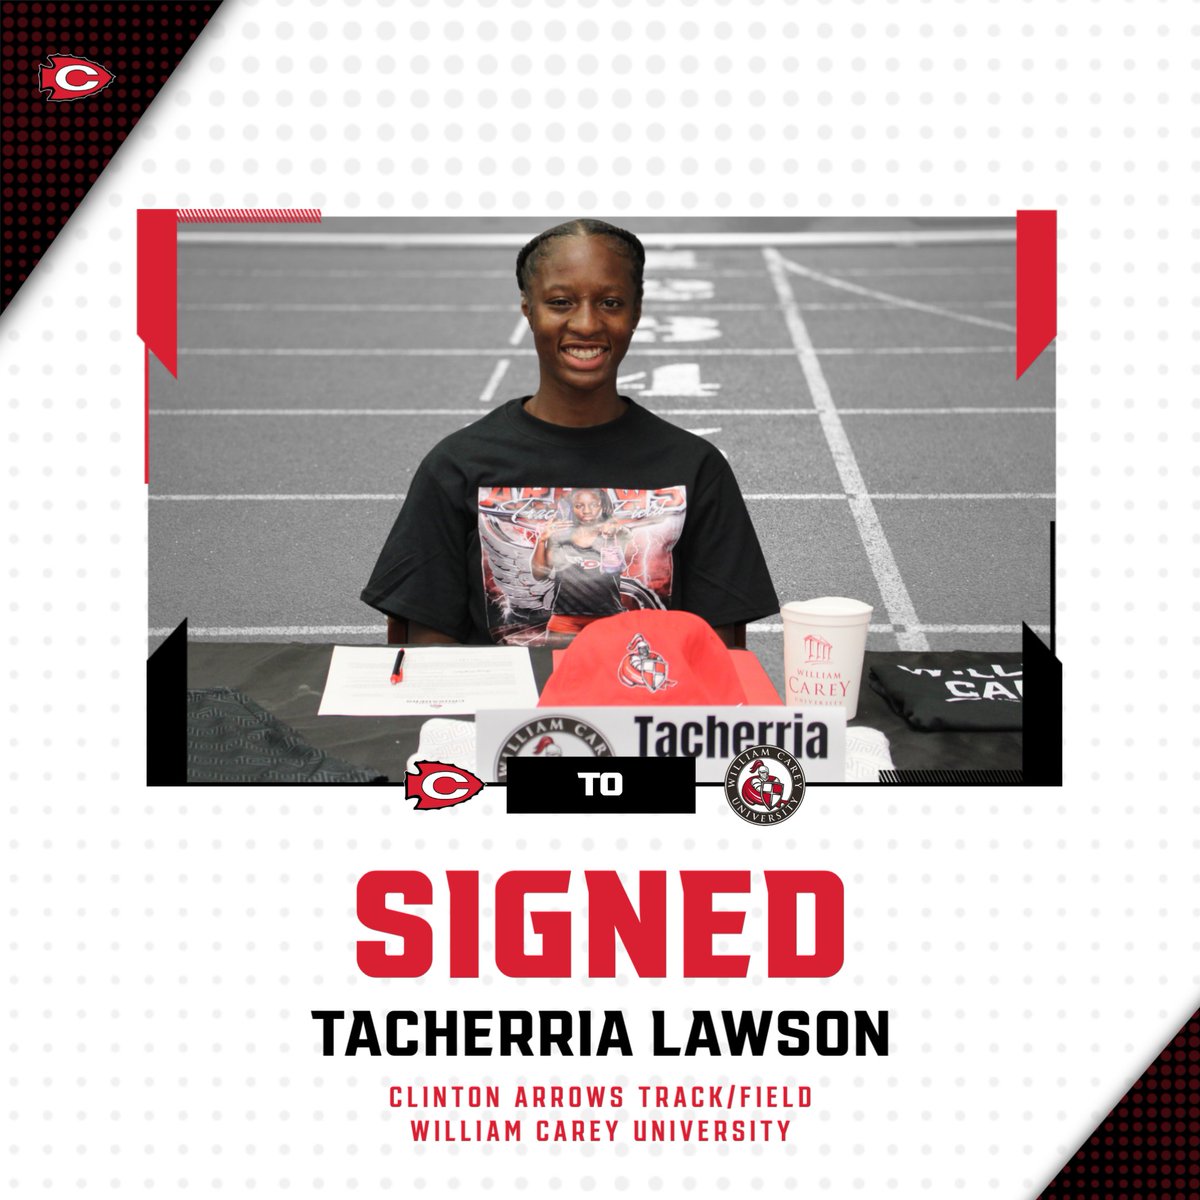 This morning, @WeAreArrowTrack star Tacherria Lawson signed a National Letter of Intent to continue her career at William Carey University. We are so proud of Shay and cannot wait to follow her success. @ClintonSchools @HeadArrowTRK